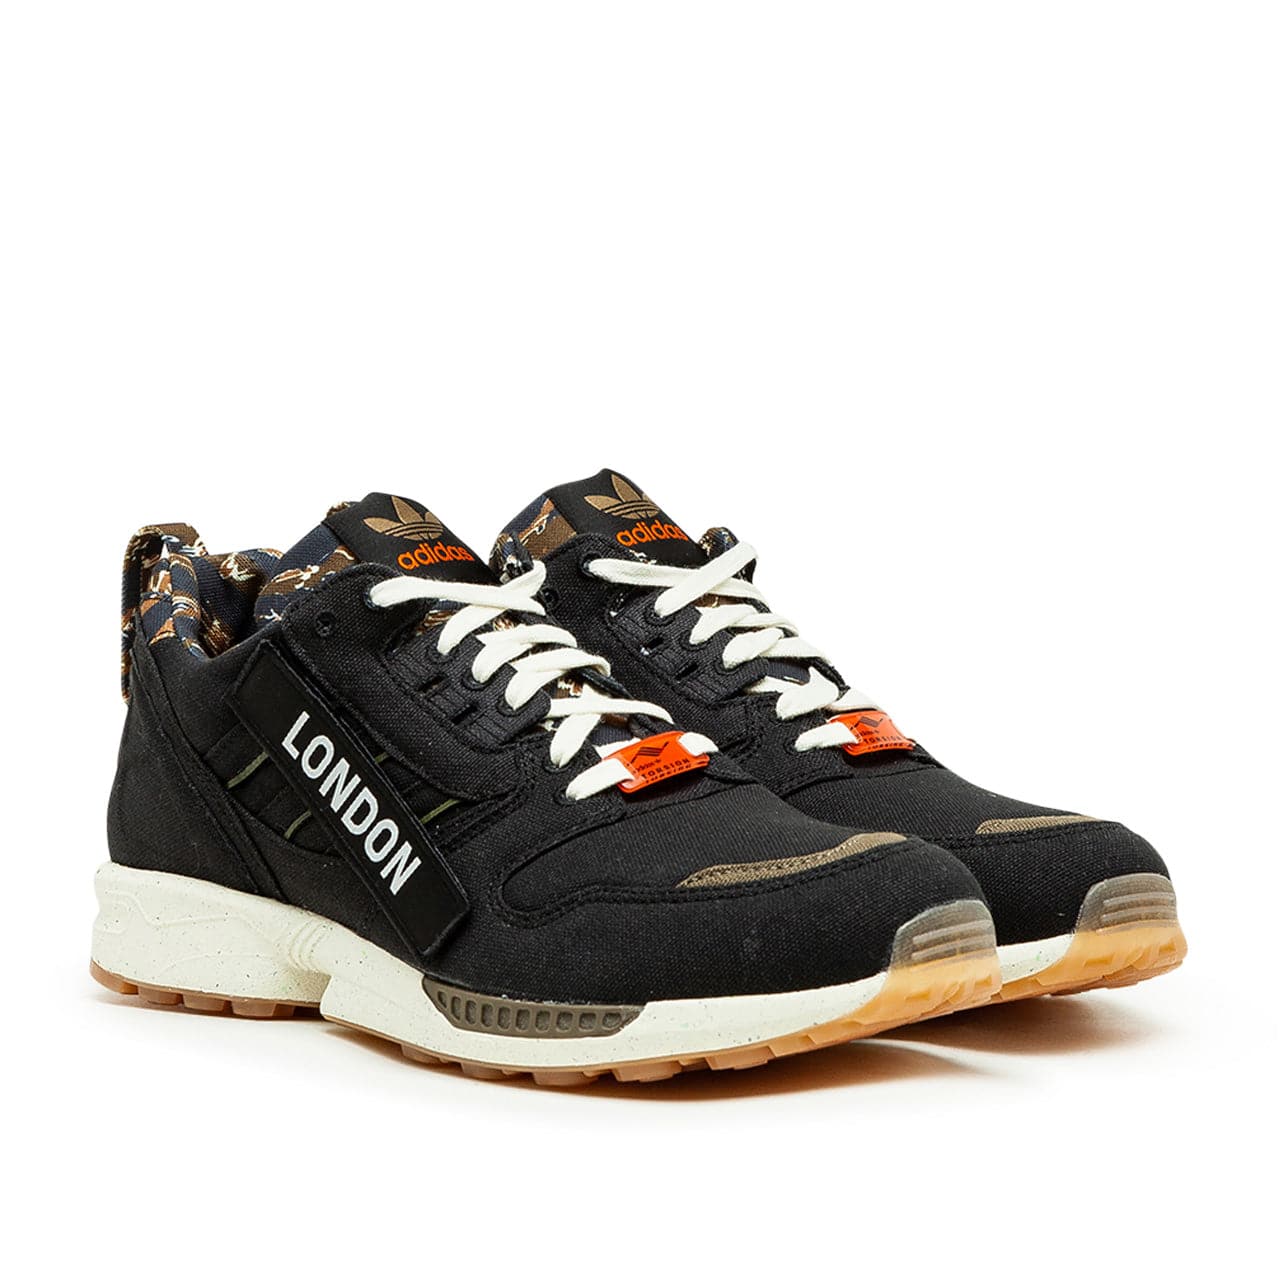 adidas ZX 8000 'Out There' (Schwarz / Weiß / Olive)  - Allike Store